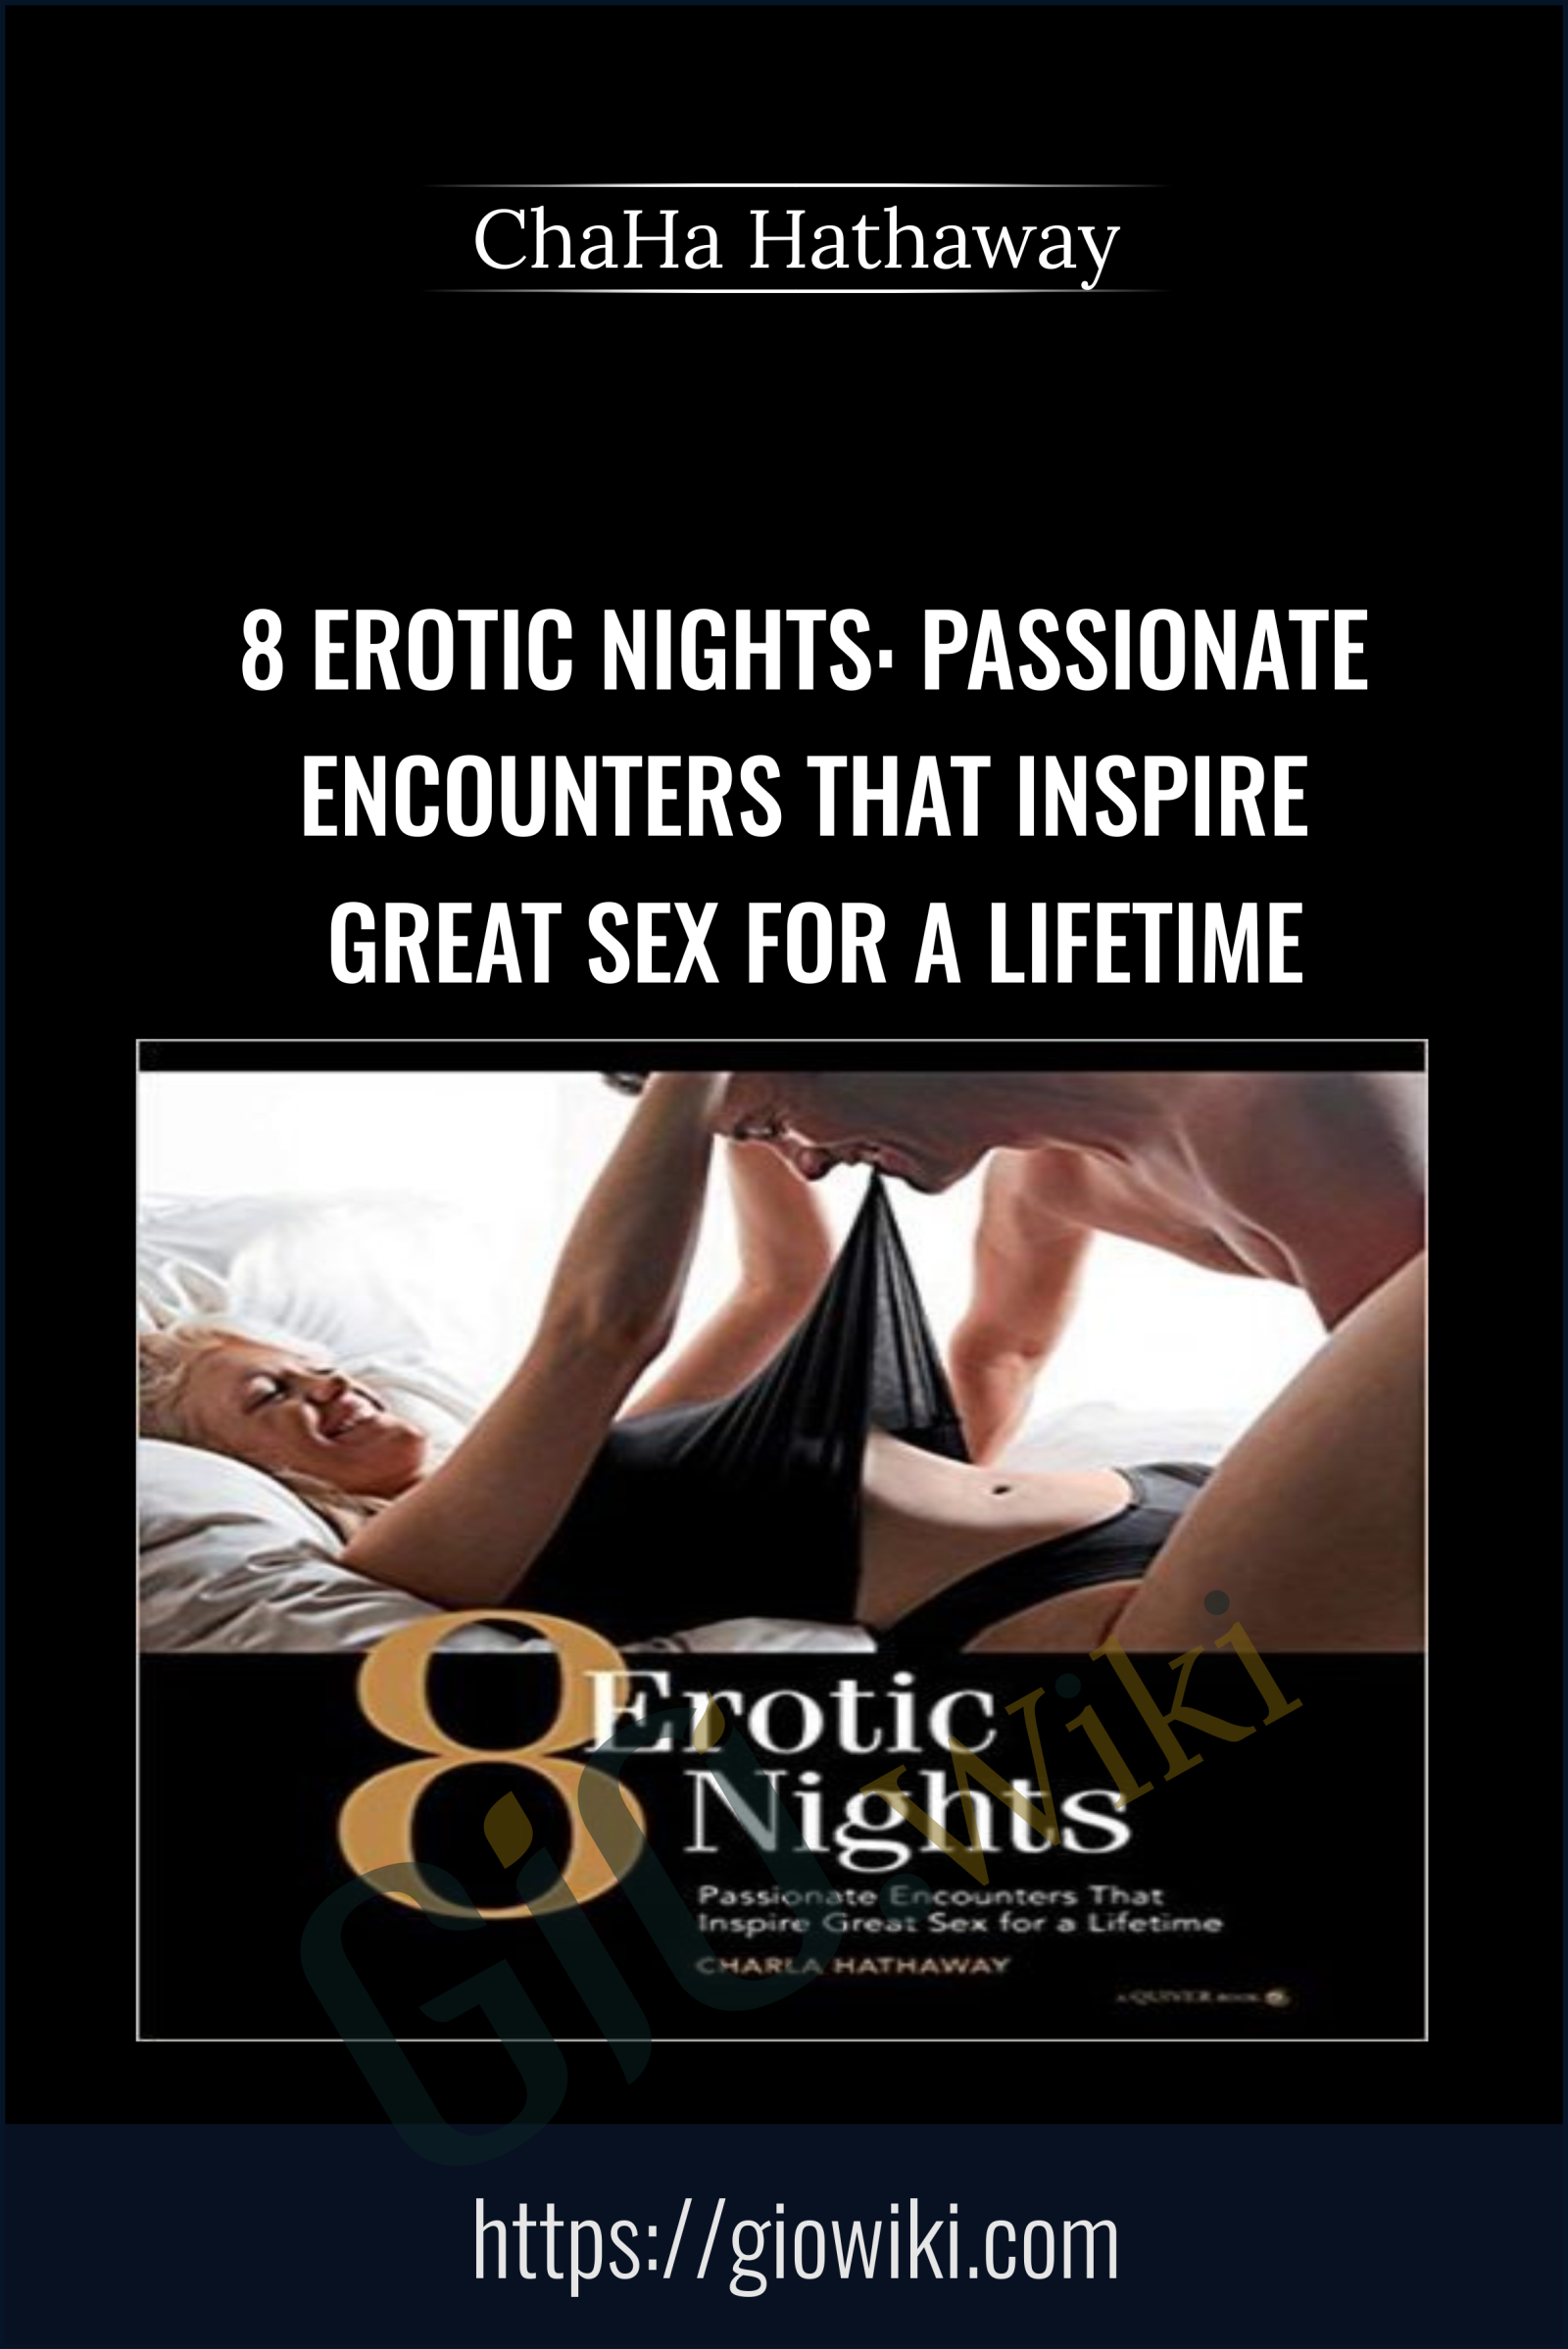 8 Erotic Nights: Passionate Encounters that Inspire Great Sex for a Lifetime - ChaHa Hathaway